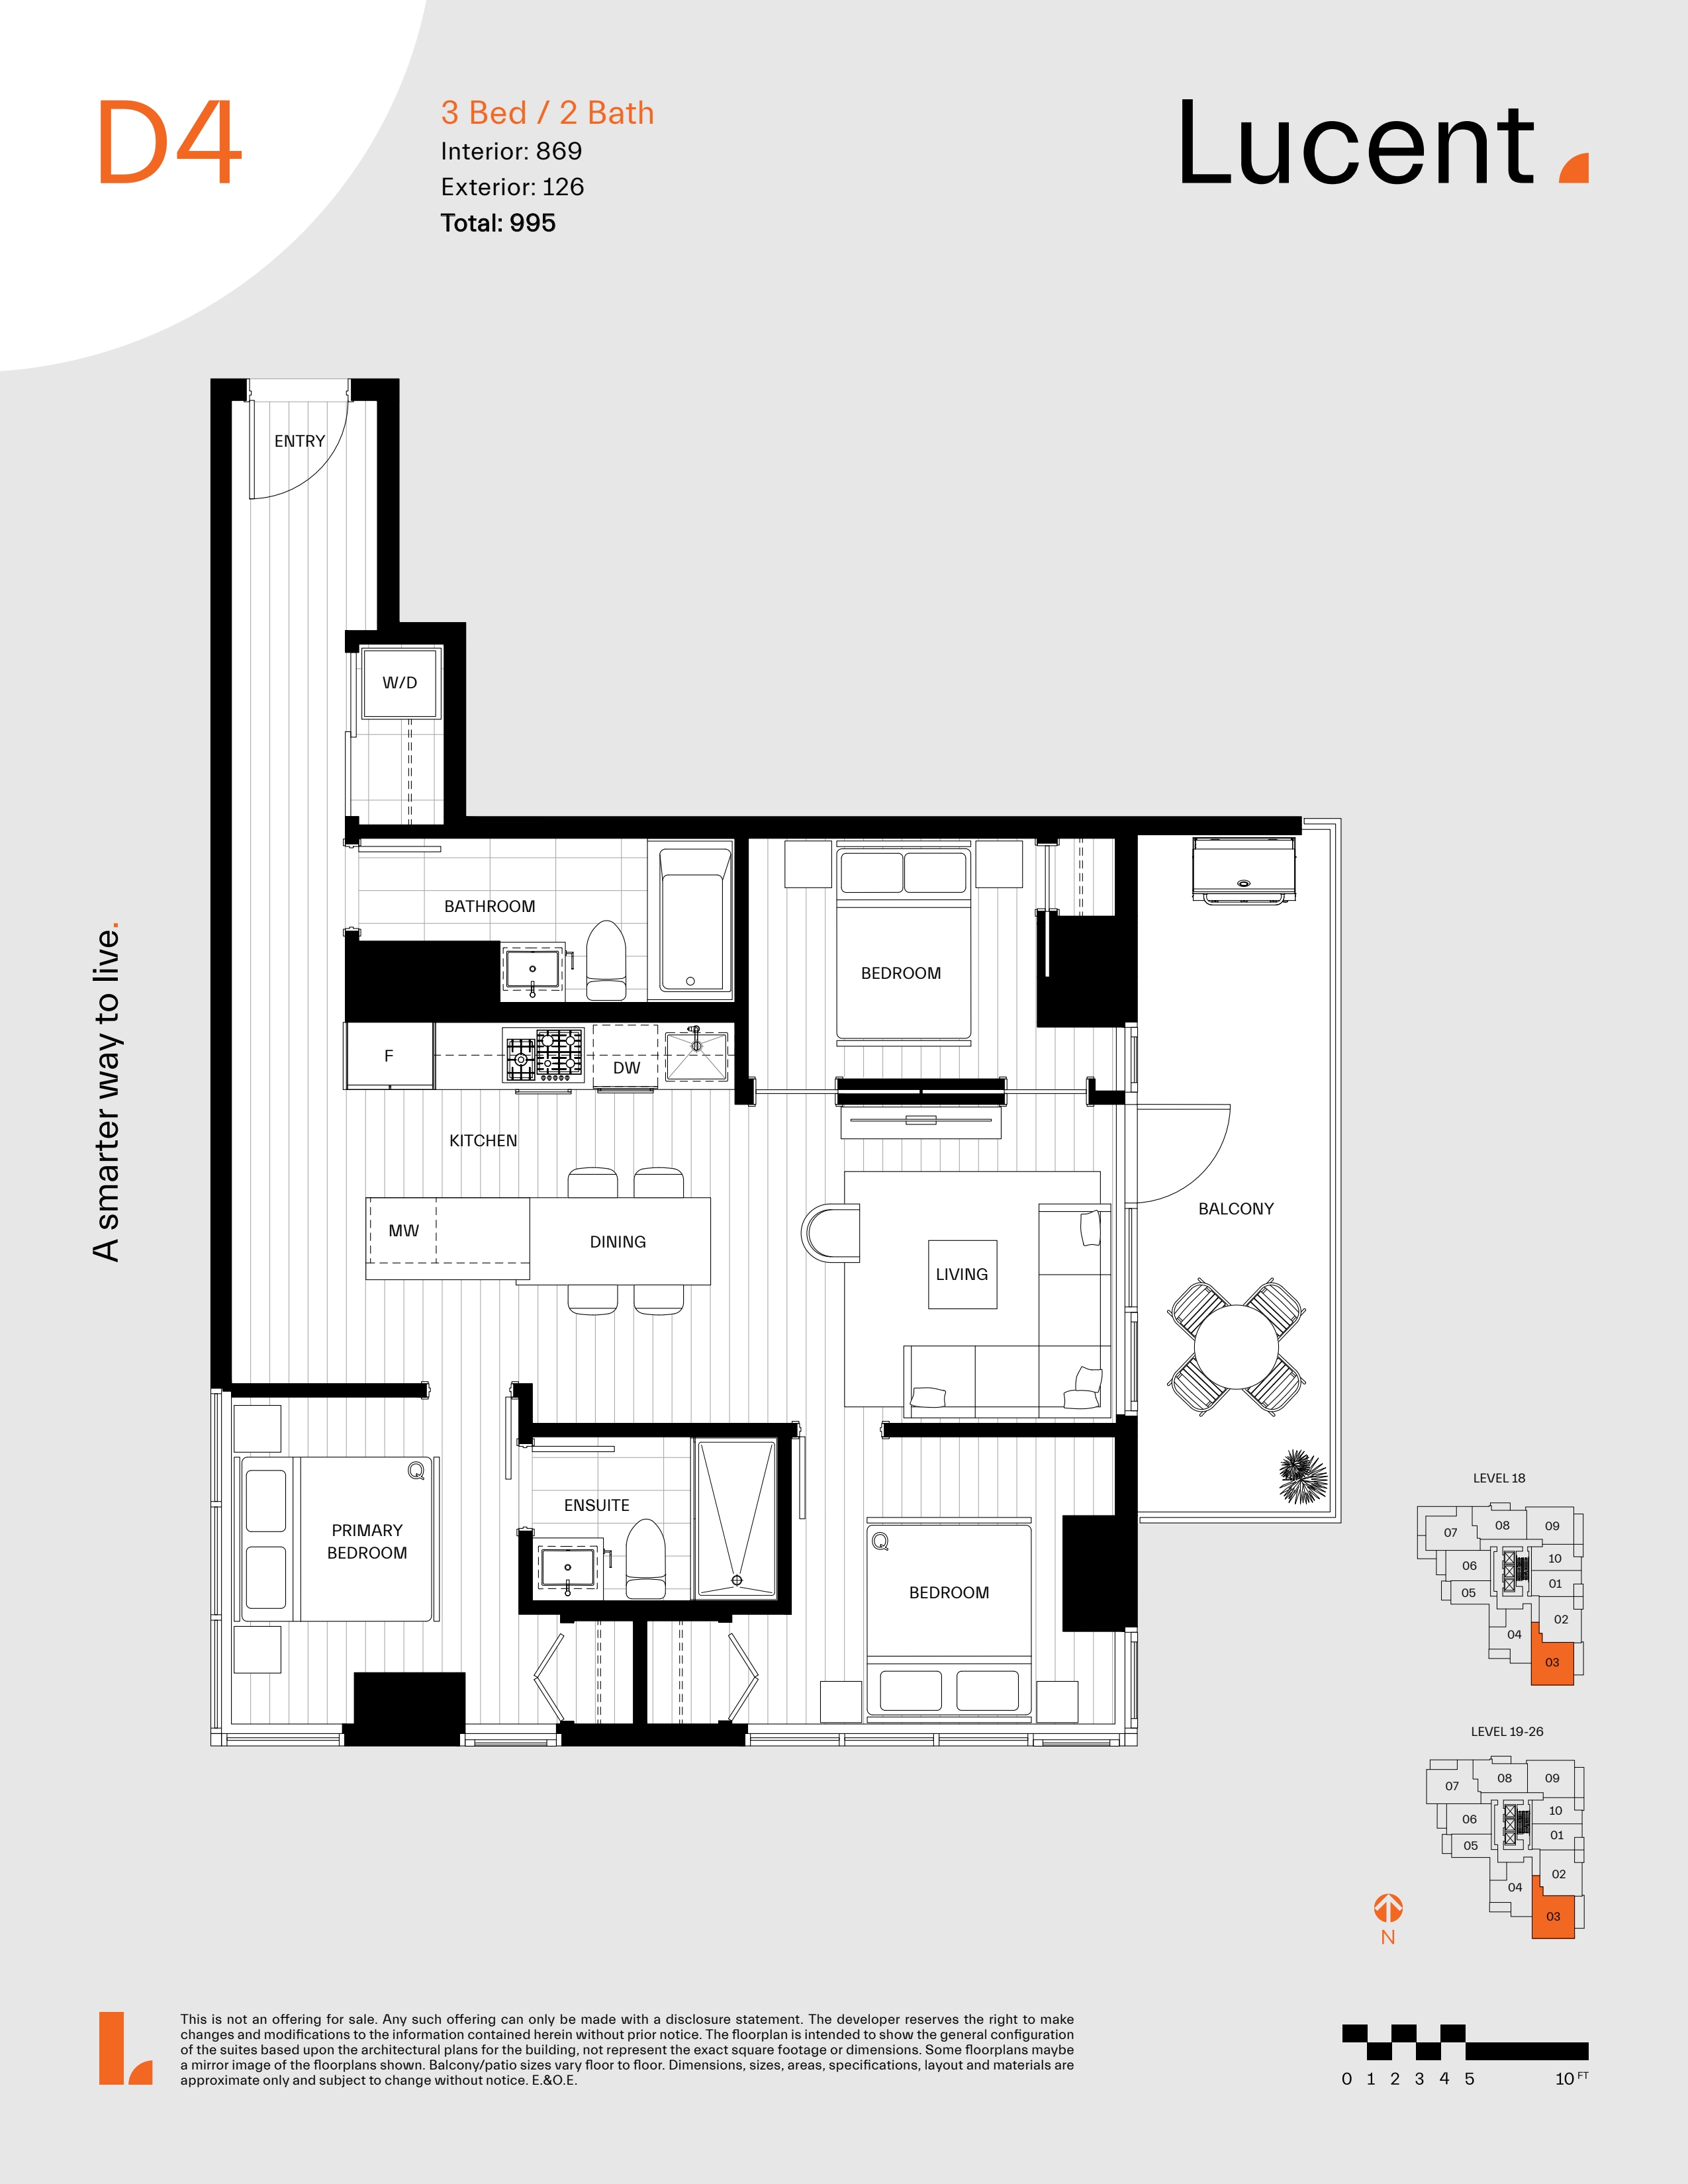 D4 Floor Plan of Lucent Condos with undefined beds